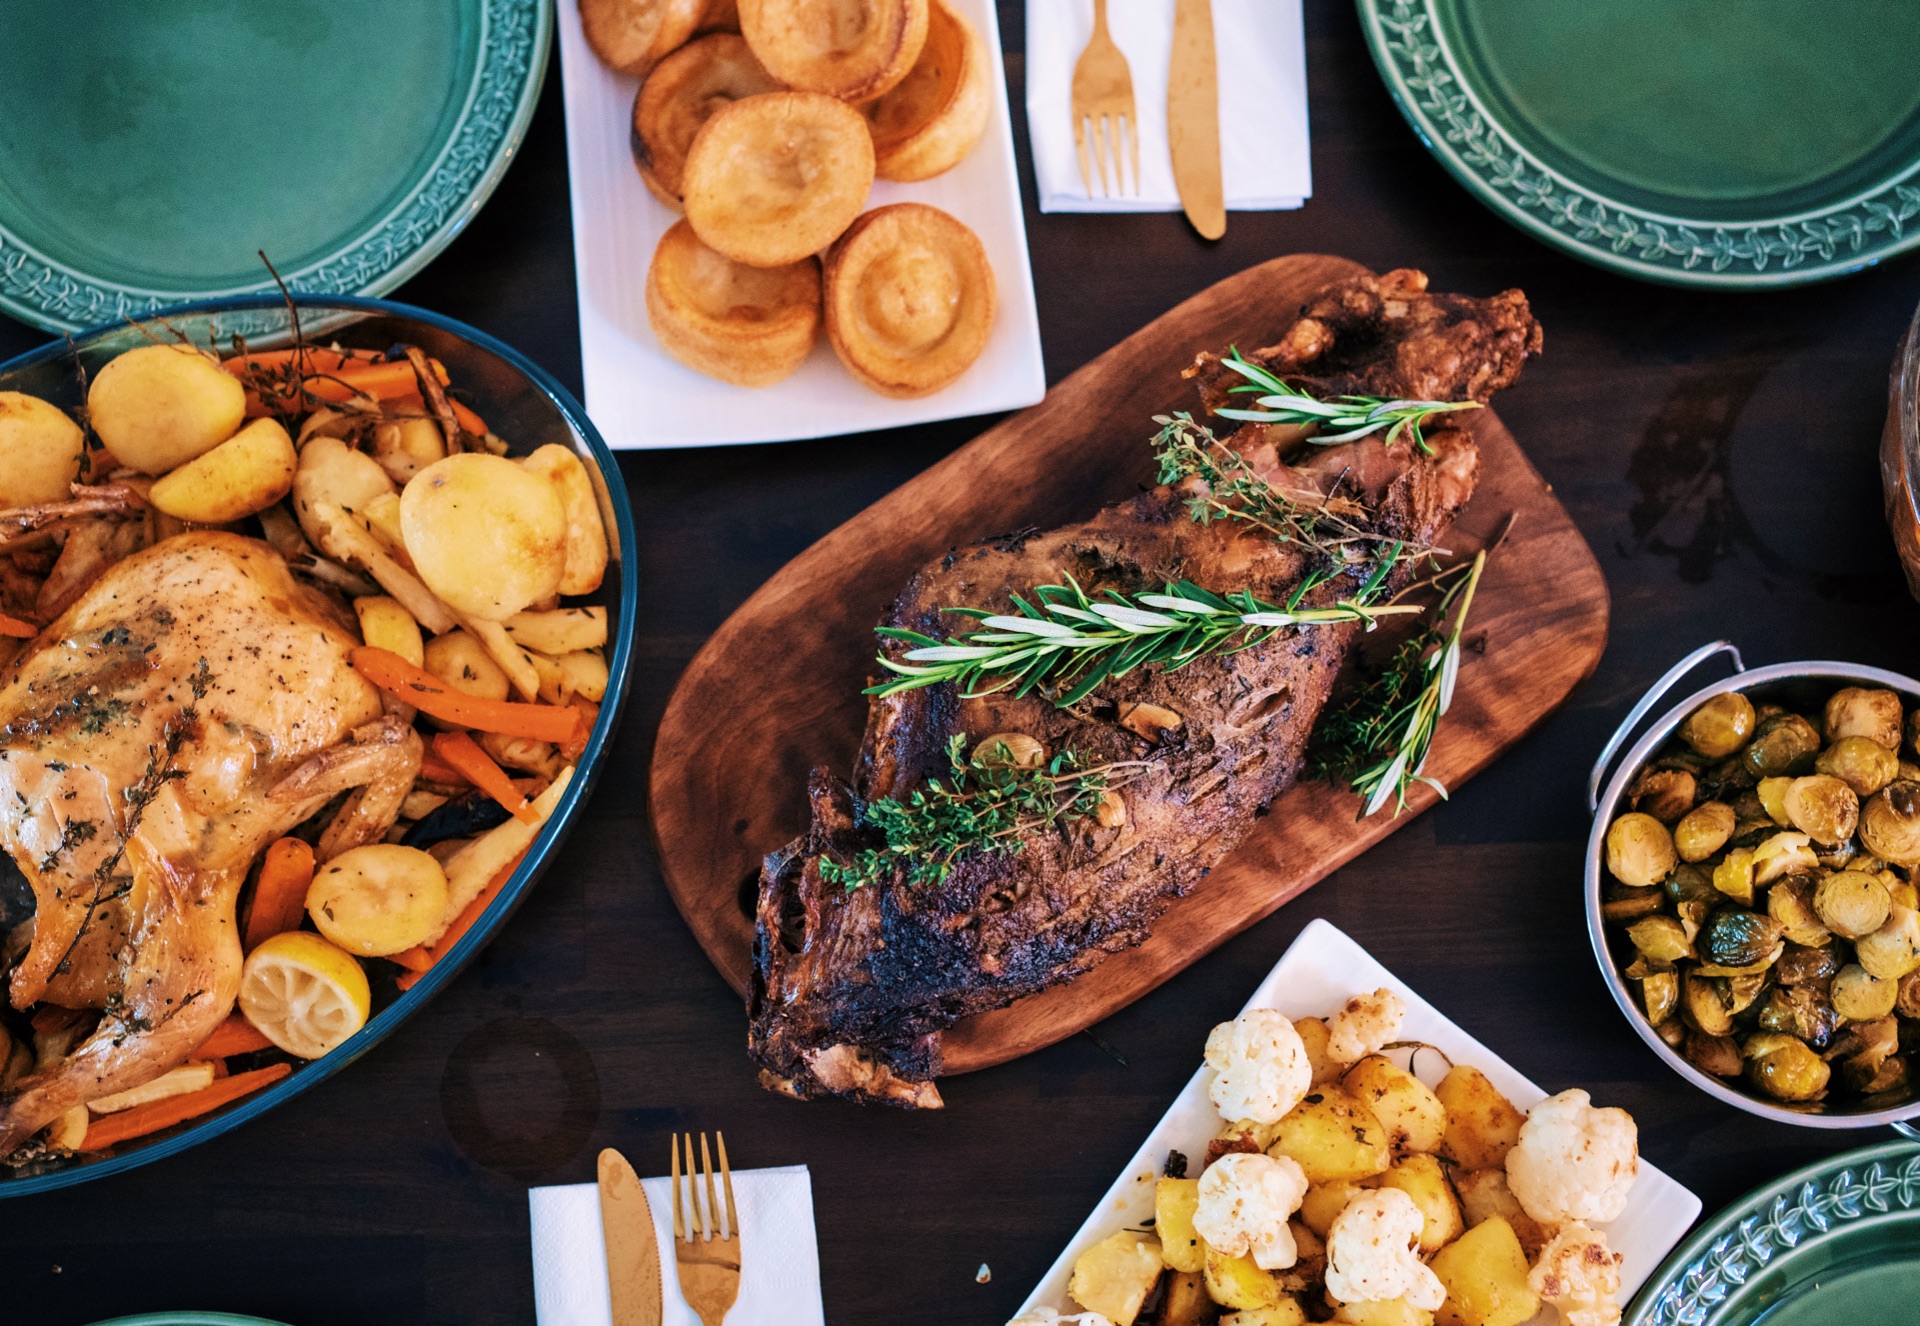 food on the table: some meat, potatoes, roast vegetables